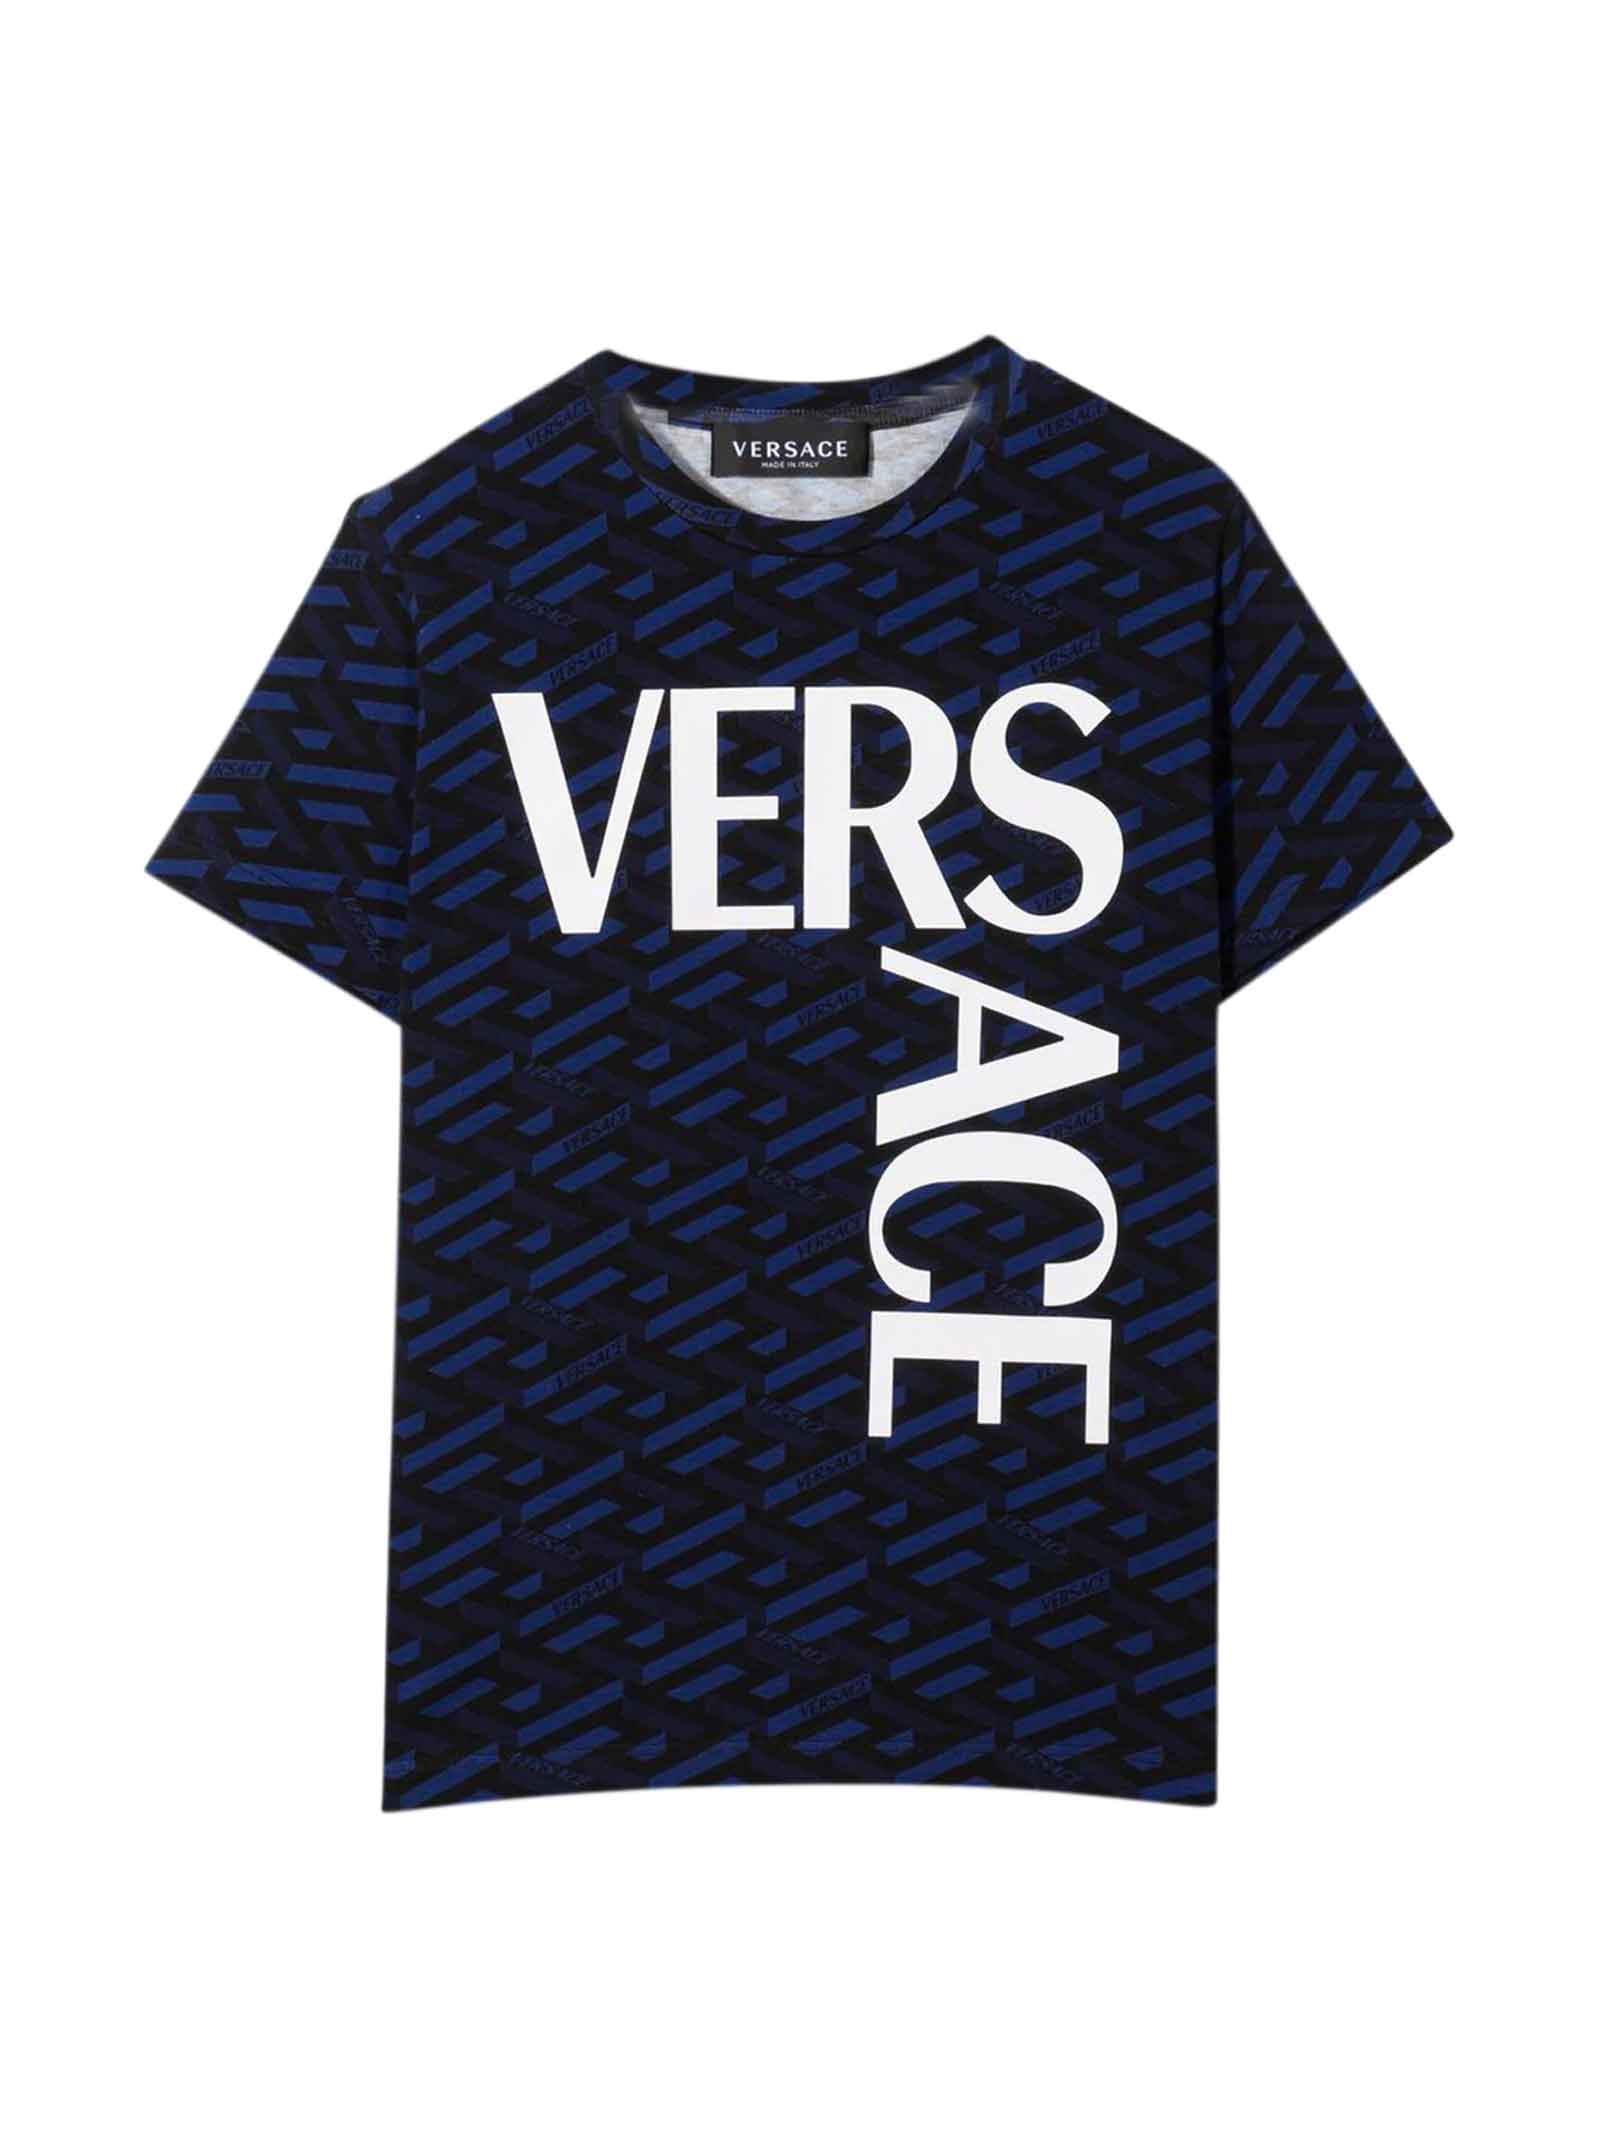 Versace Blue And Black T-shirt With Print And Logo Verscae Kids